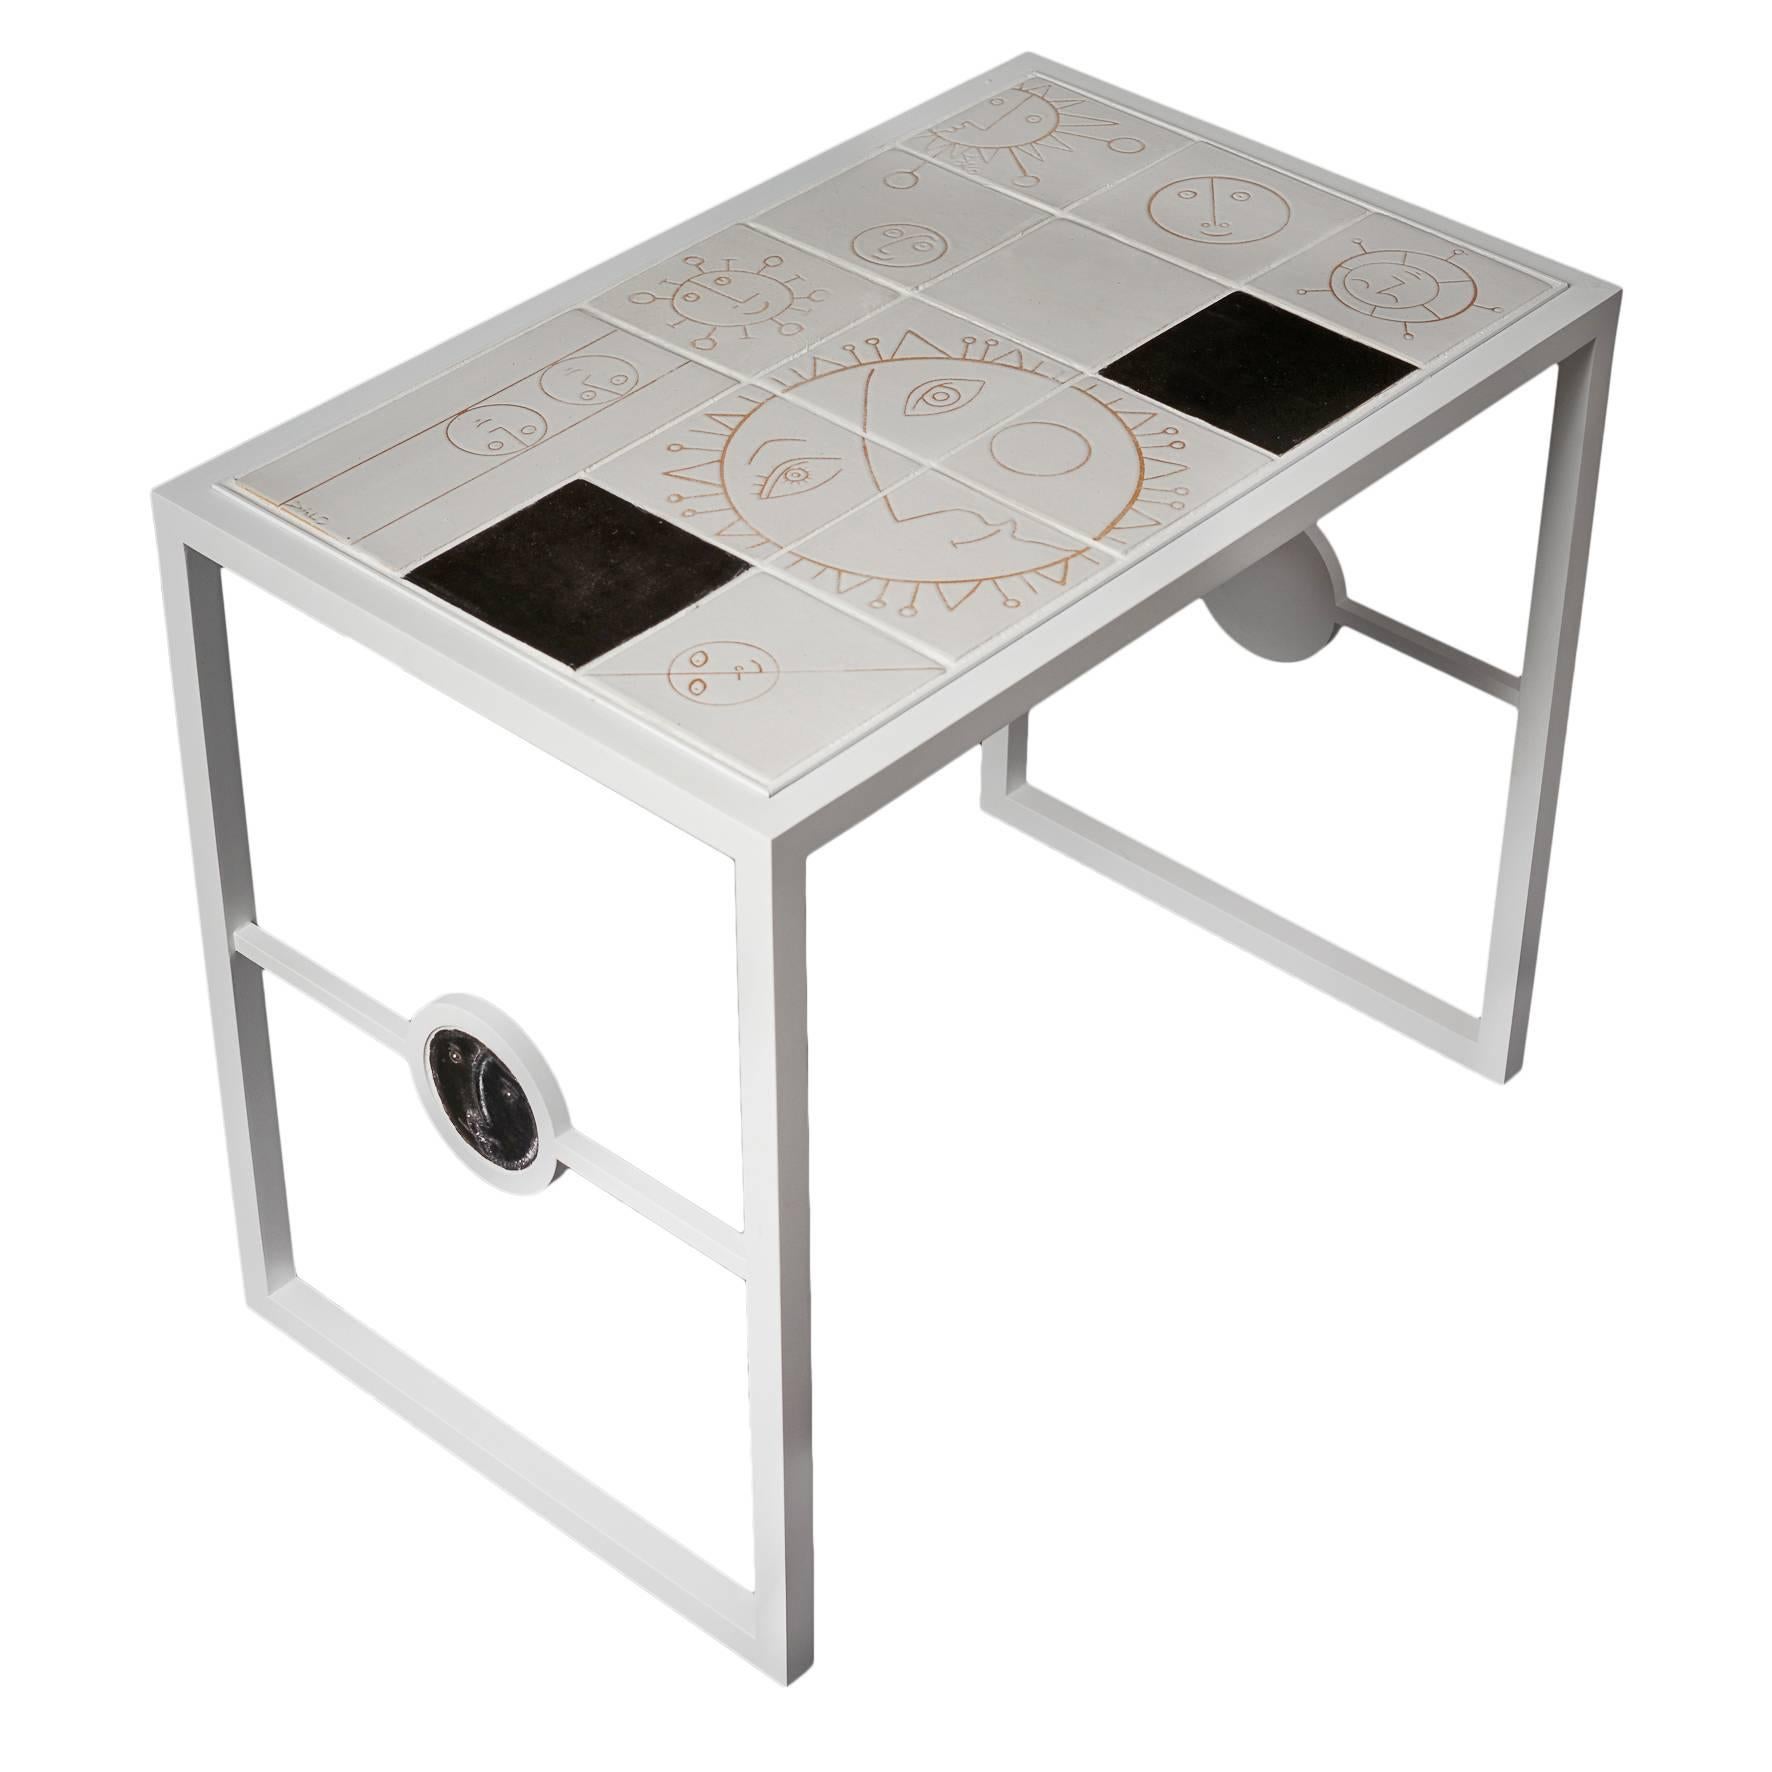 White Ceramic and Metal Coffee Table by DaLo, 2015